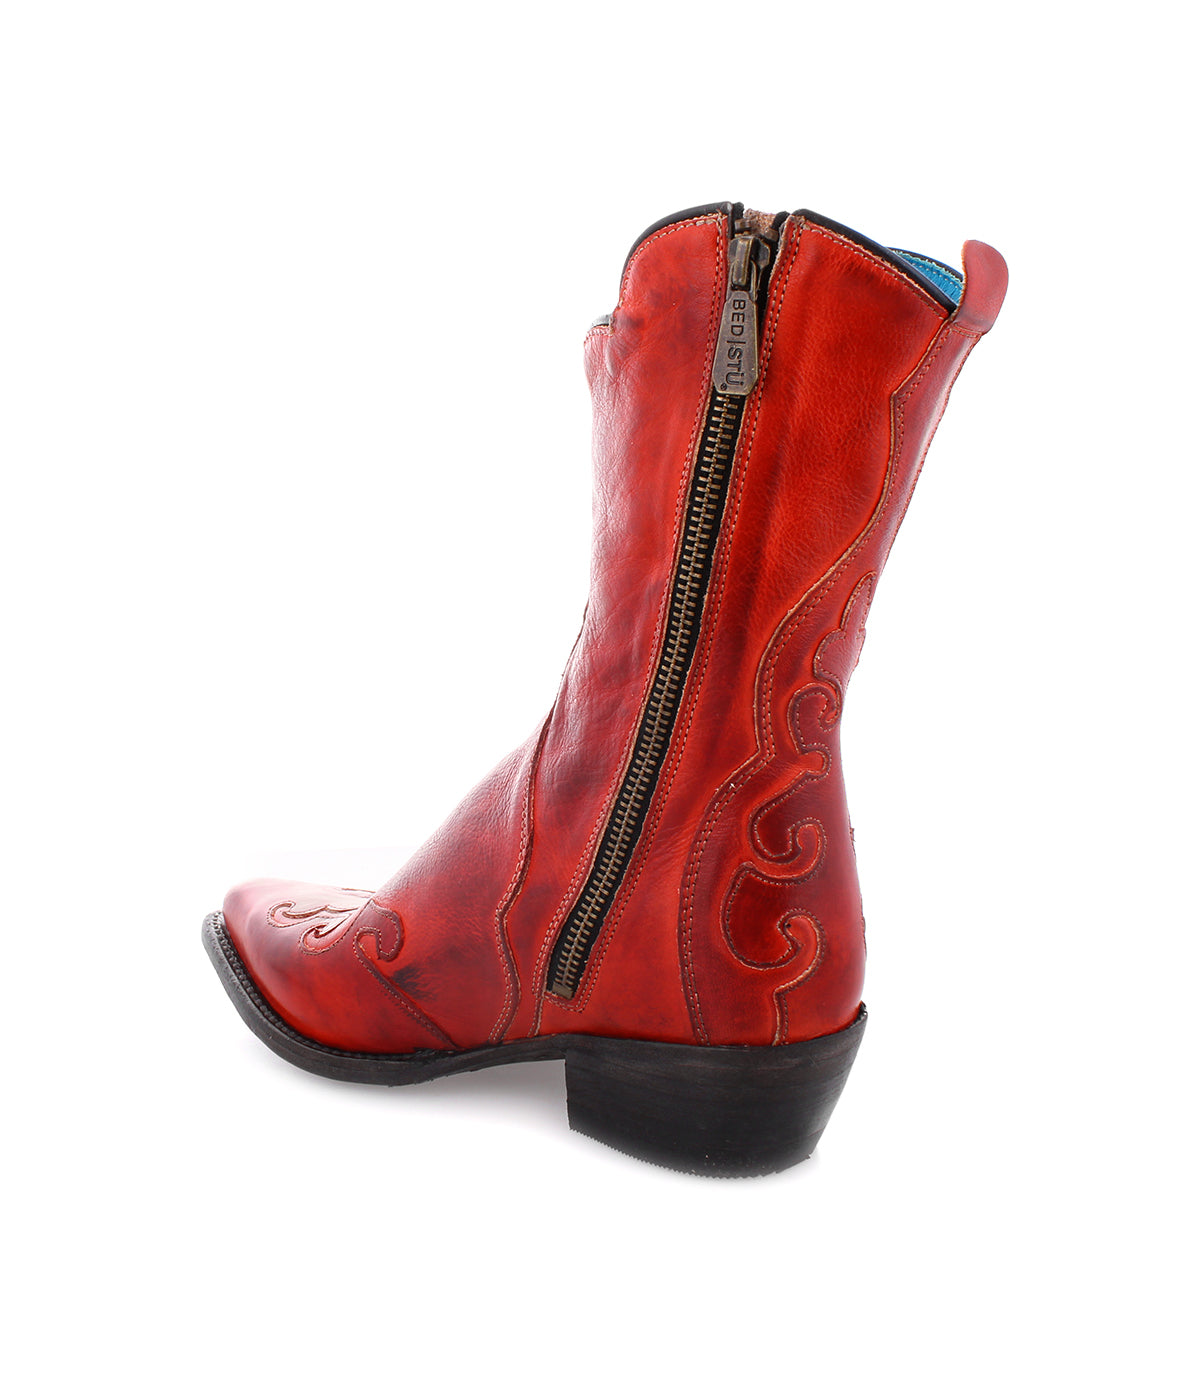 Bed Stu Deuce vegetable-tanned leather boots in a western style with a zipper on the side.